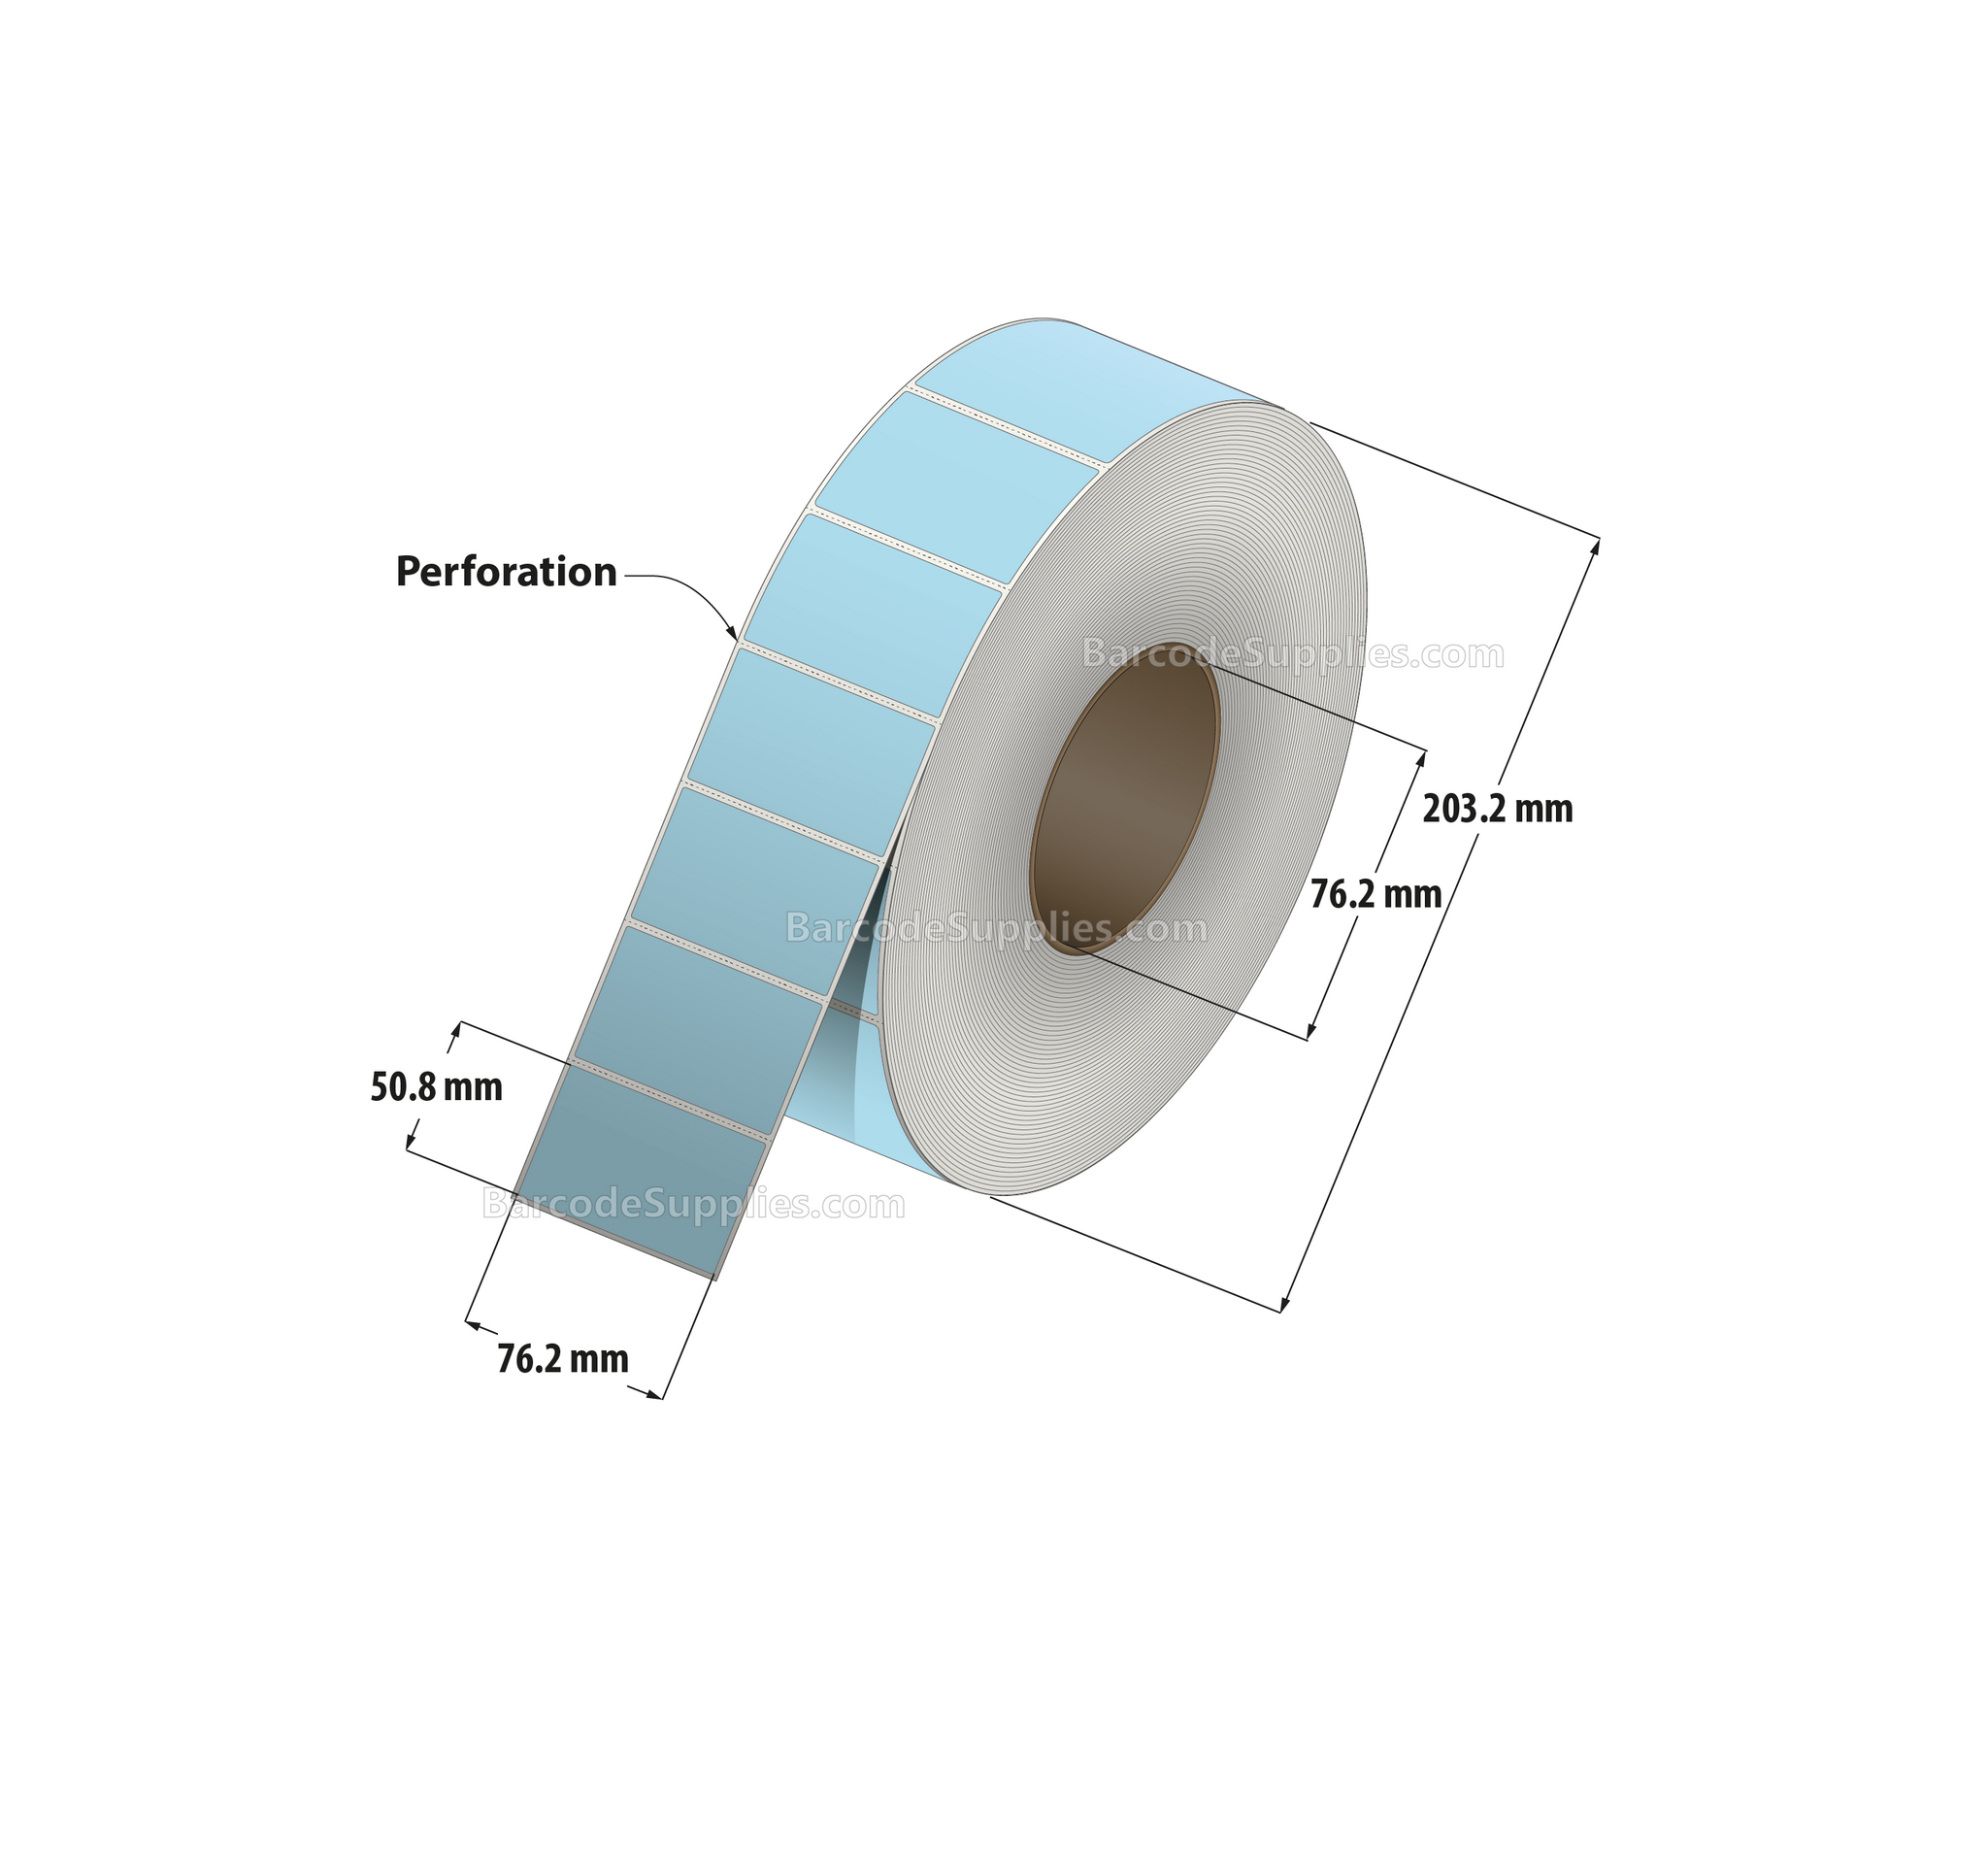 3 x 2 Thermal Transfer 290 Blue Labels With Permanent Adhesive - Perforated - 2900 Labels Per Roll - Carton Of 8 Rolls - 23200 Labels Total - MPN: RFC-3-2-2900-BL